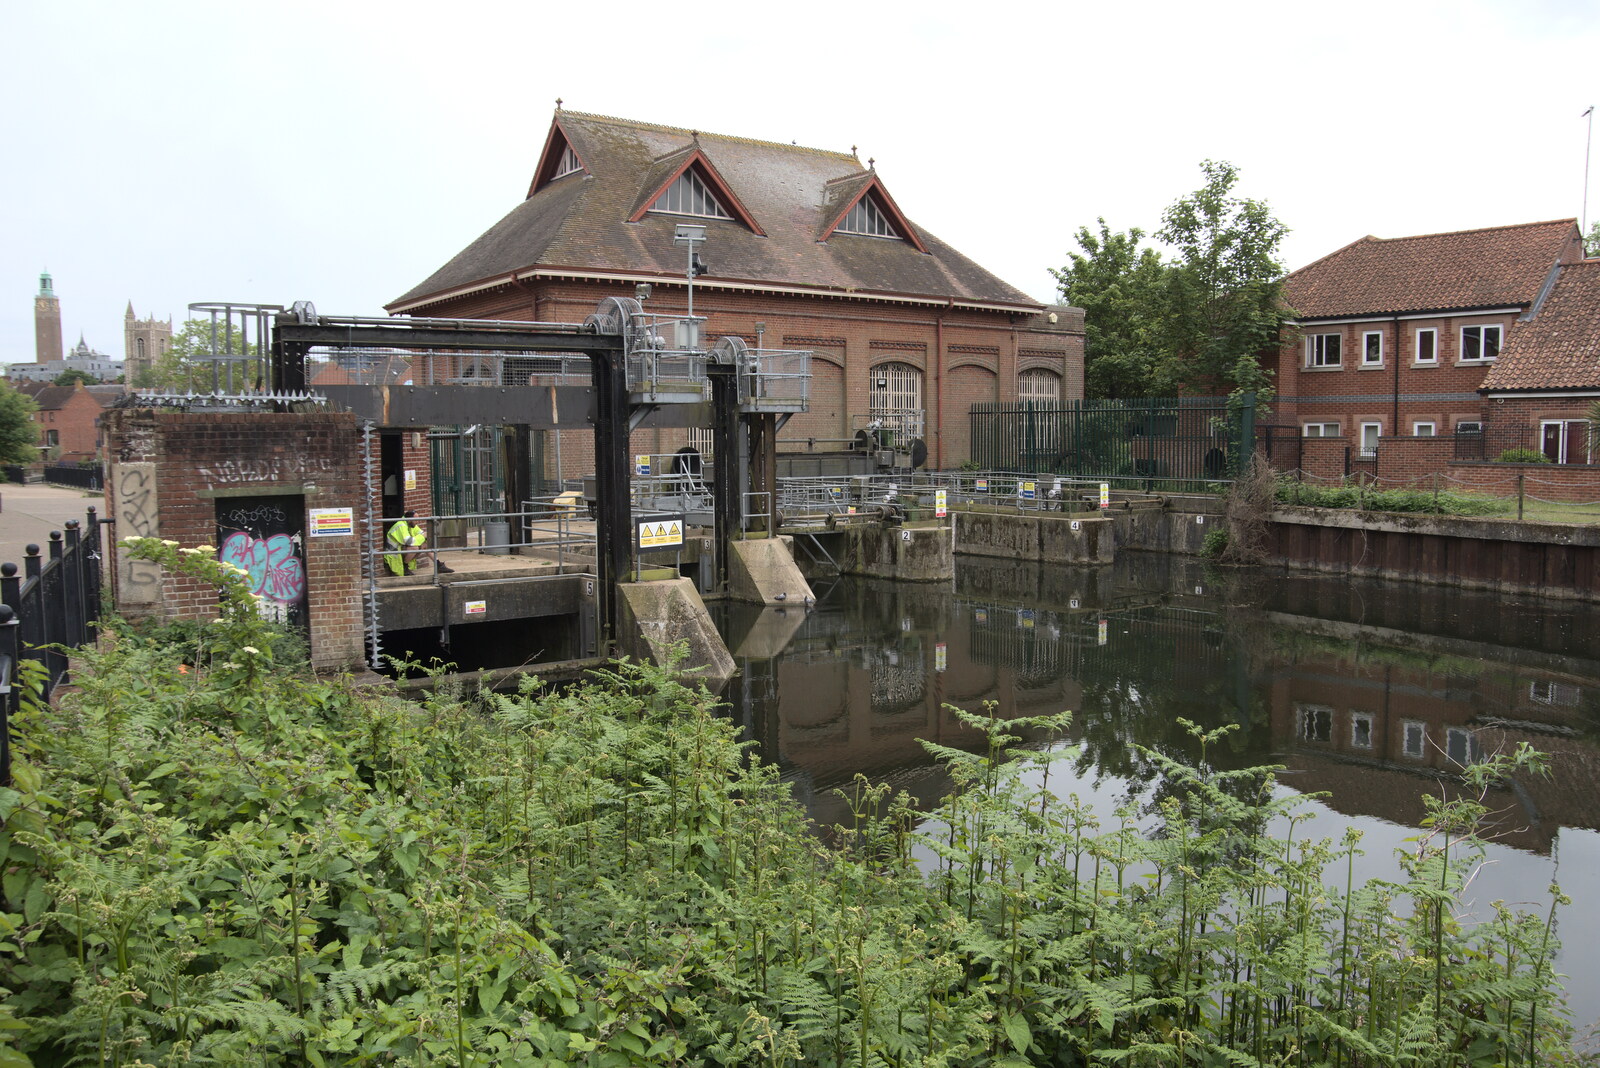 New Mills sluice, where tidal waters and river meet from Discovering the Hidden City: Norwich, Norfolk - 23rd May 2022